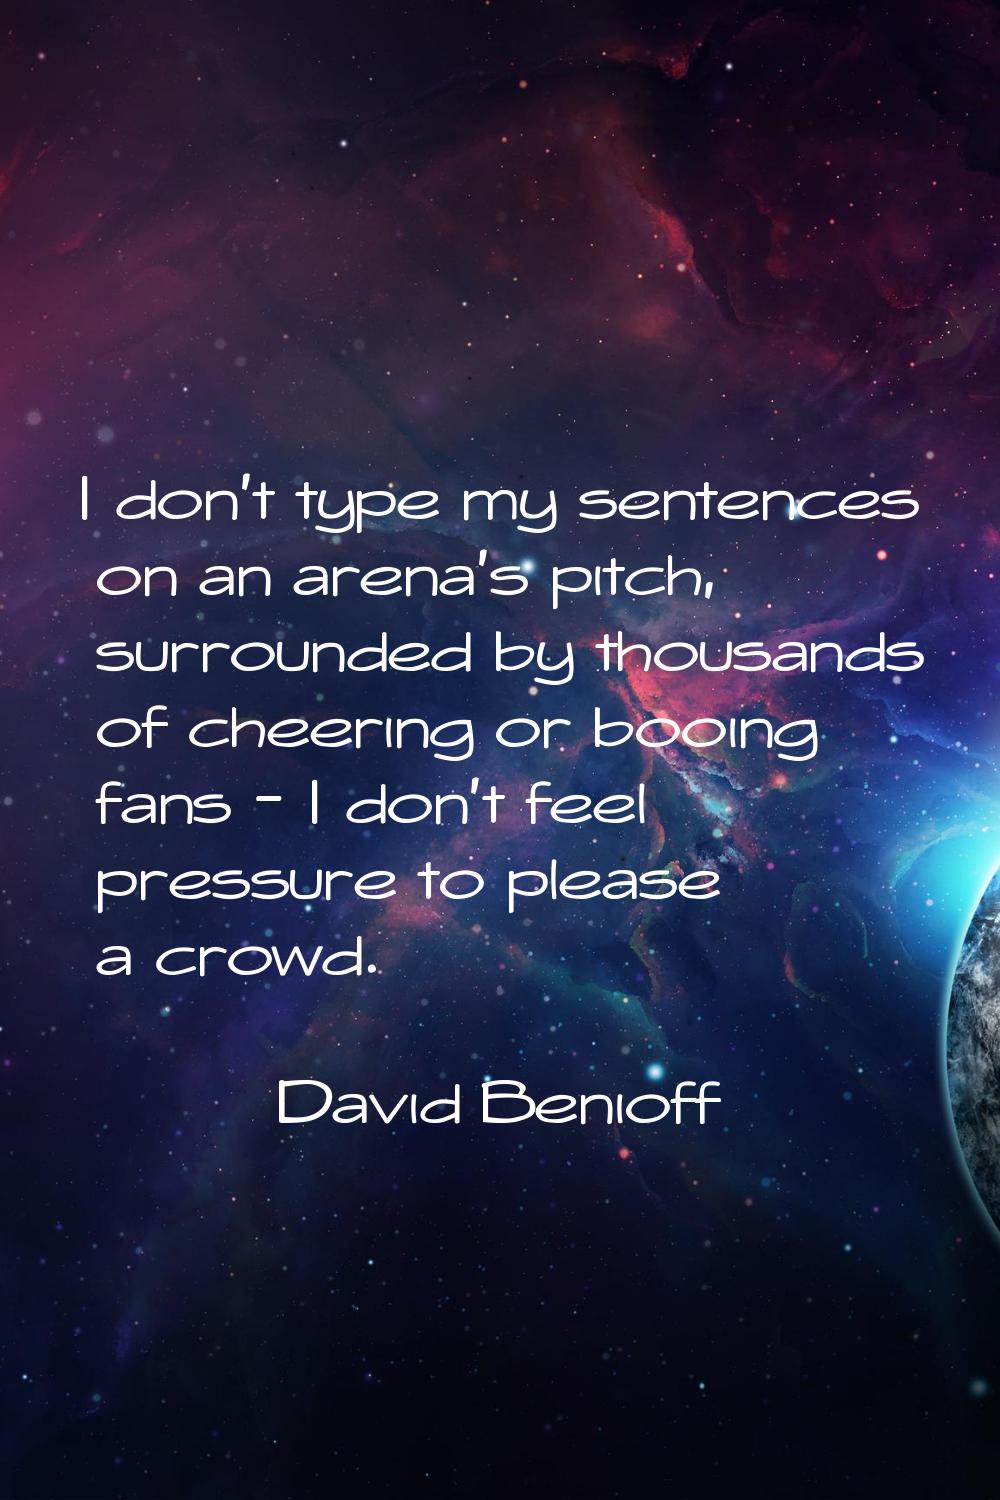 I don't type my sentences on an arena's pitch, surrounded by thousands of cheering or booing fans -